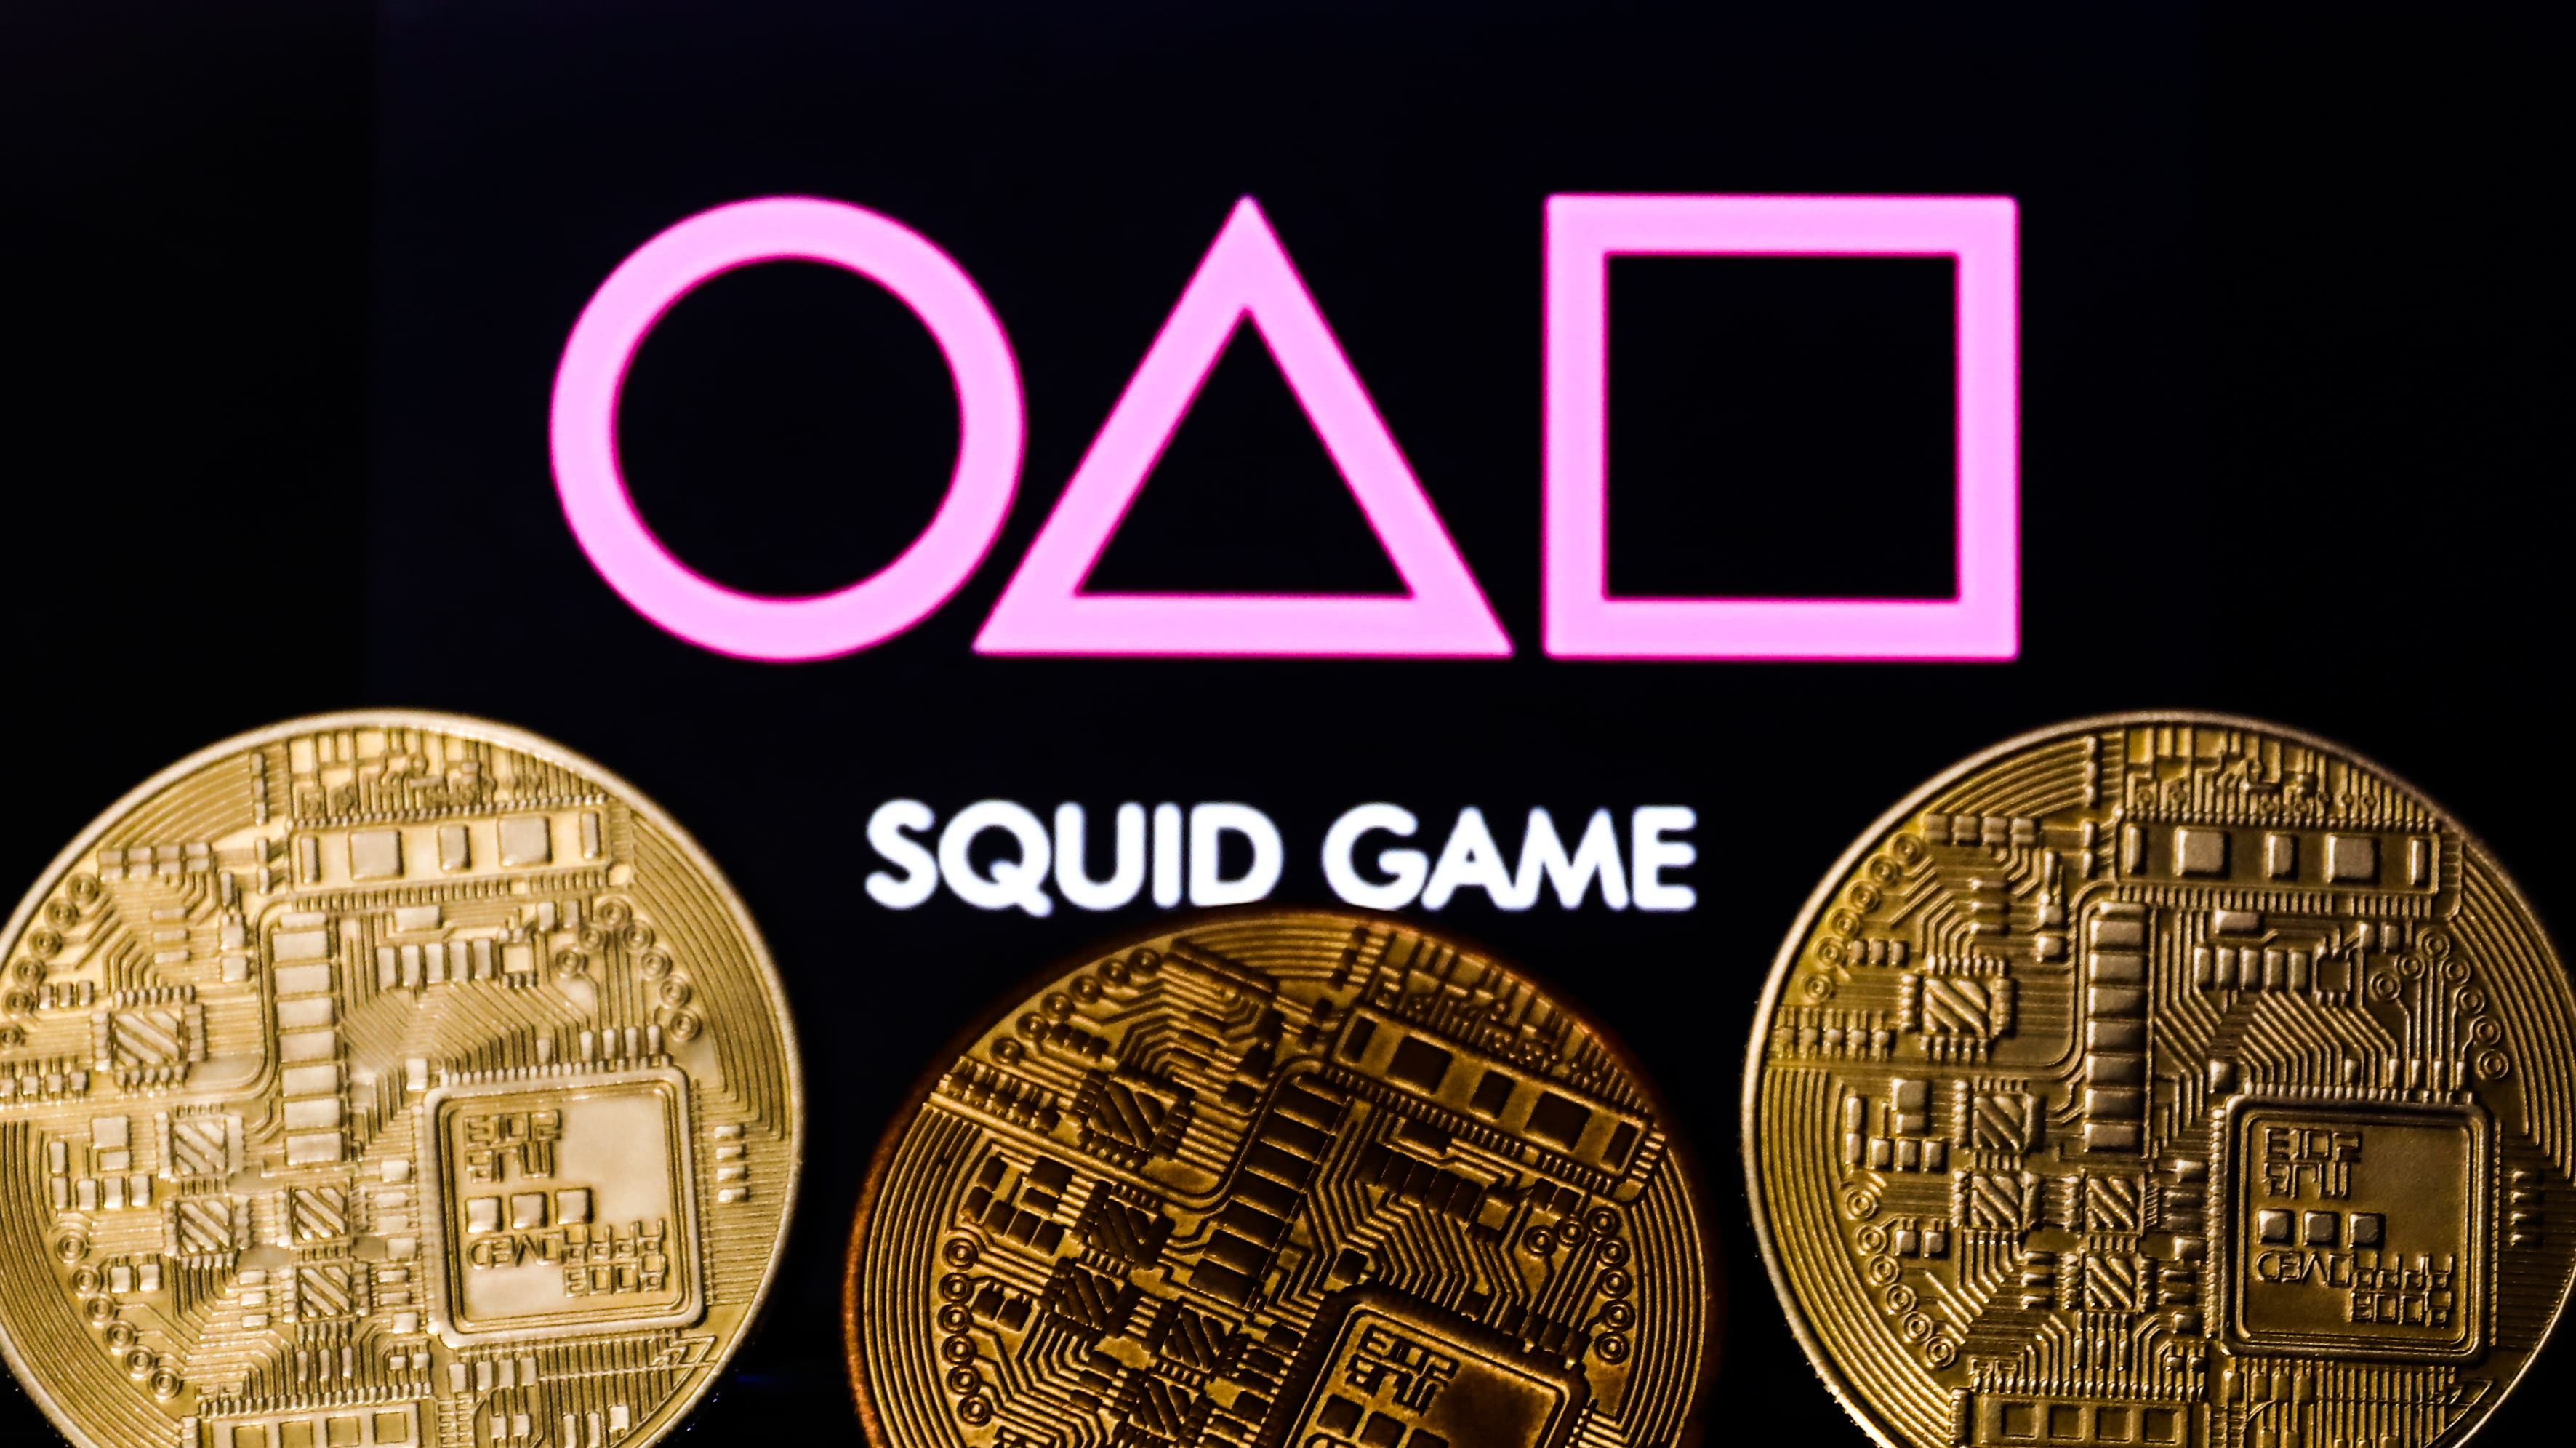 The crash in the Squid Game cryptocurrency lasted only minutes